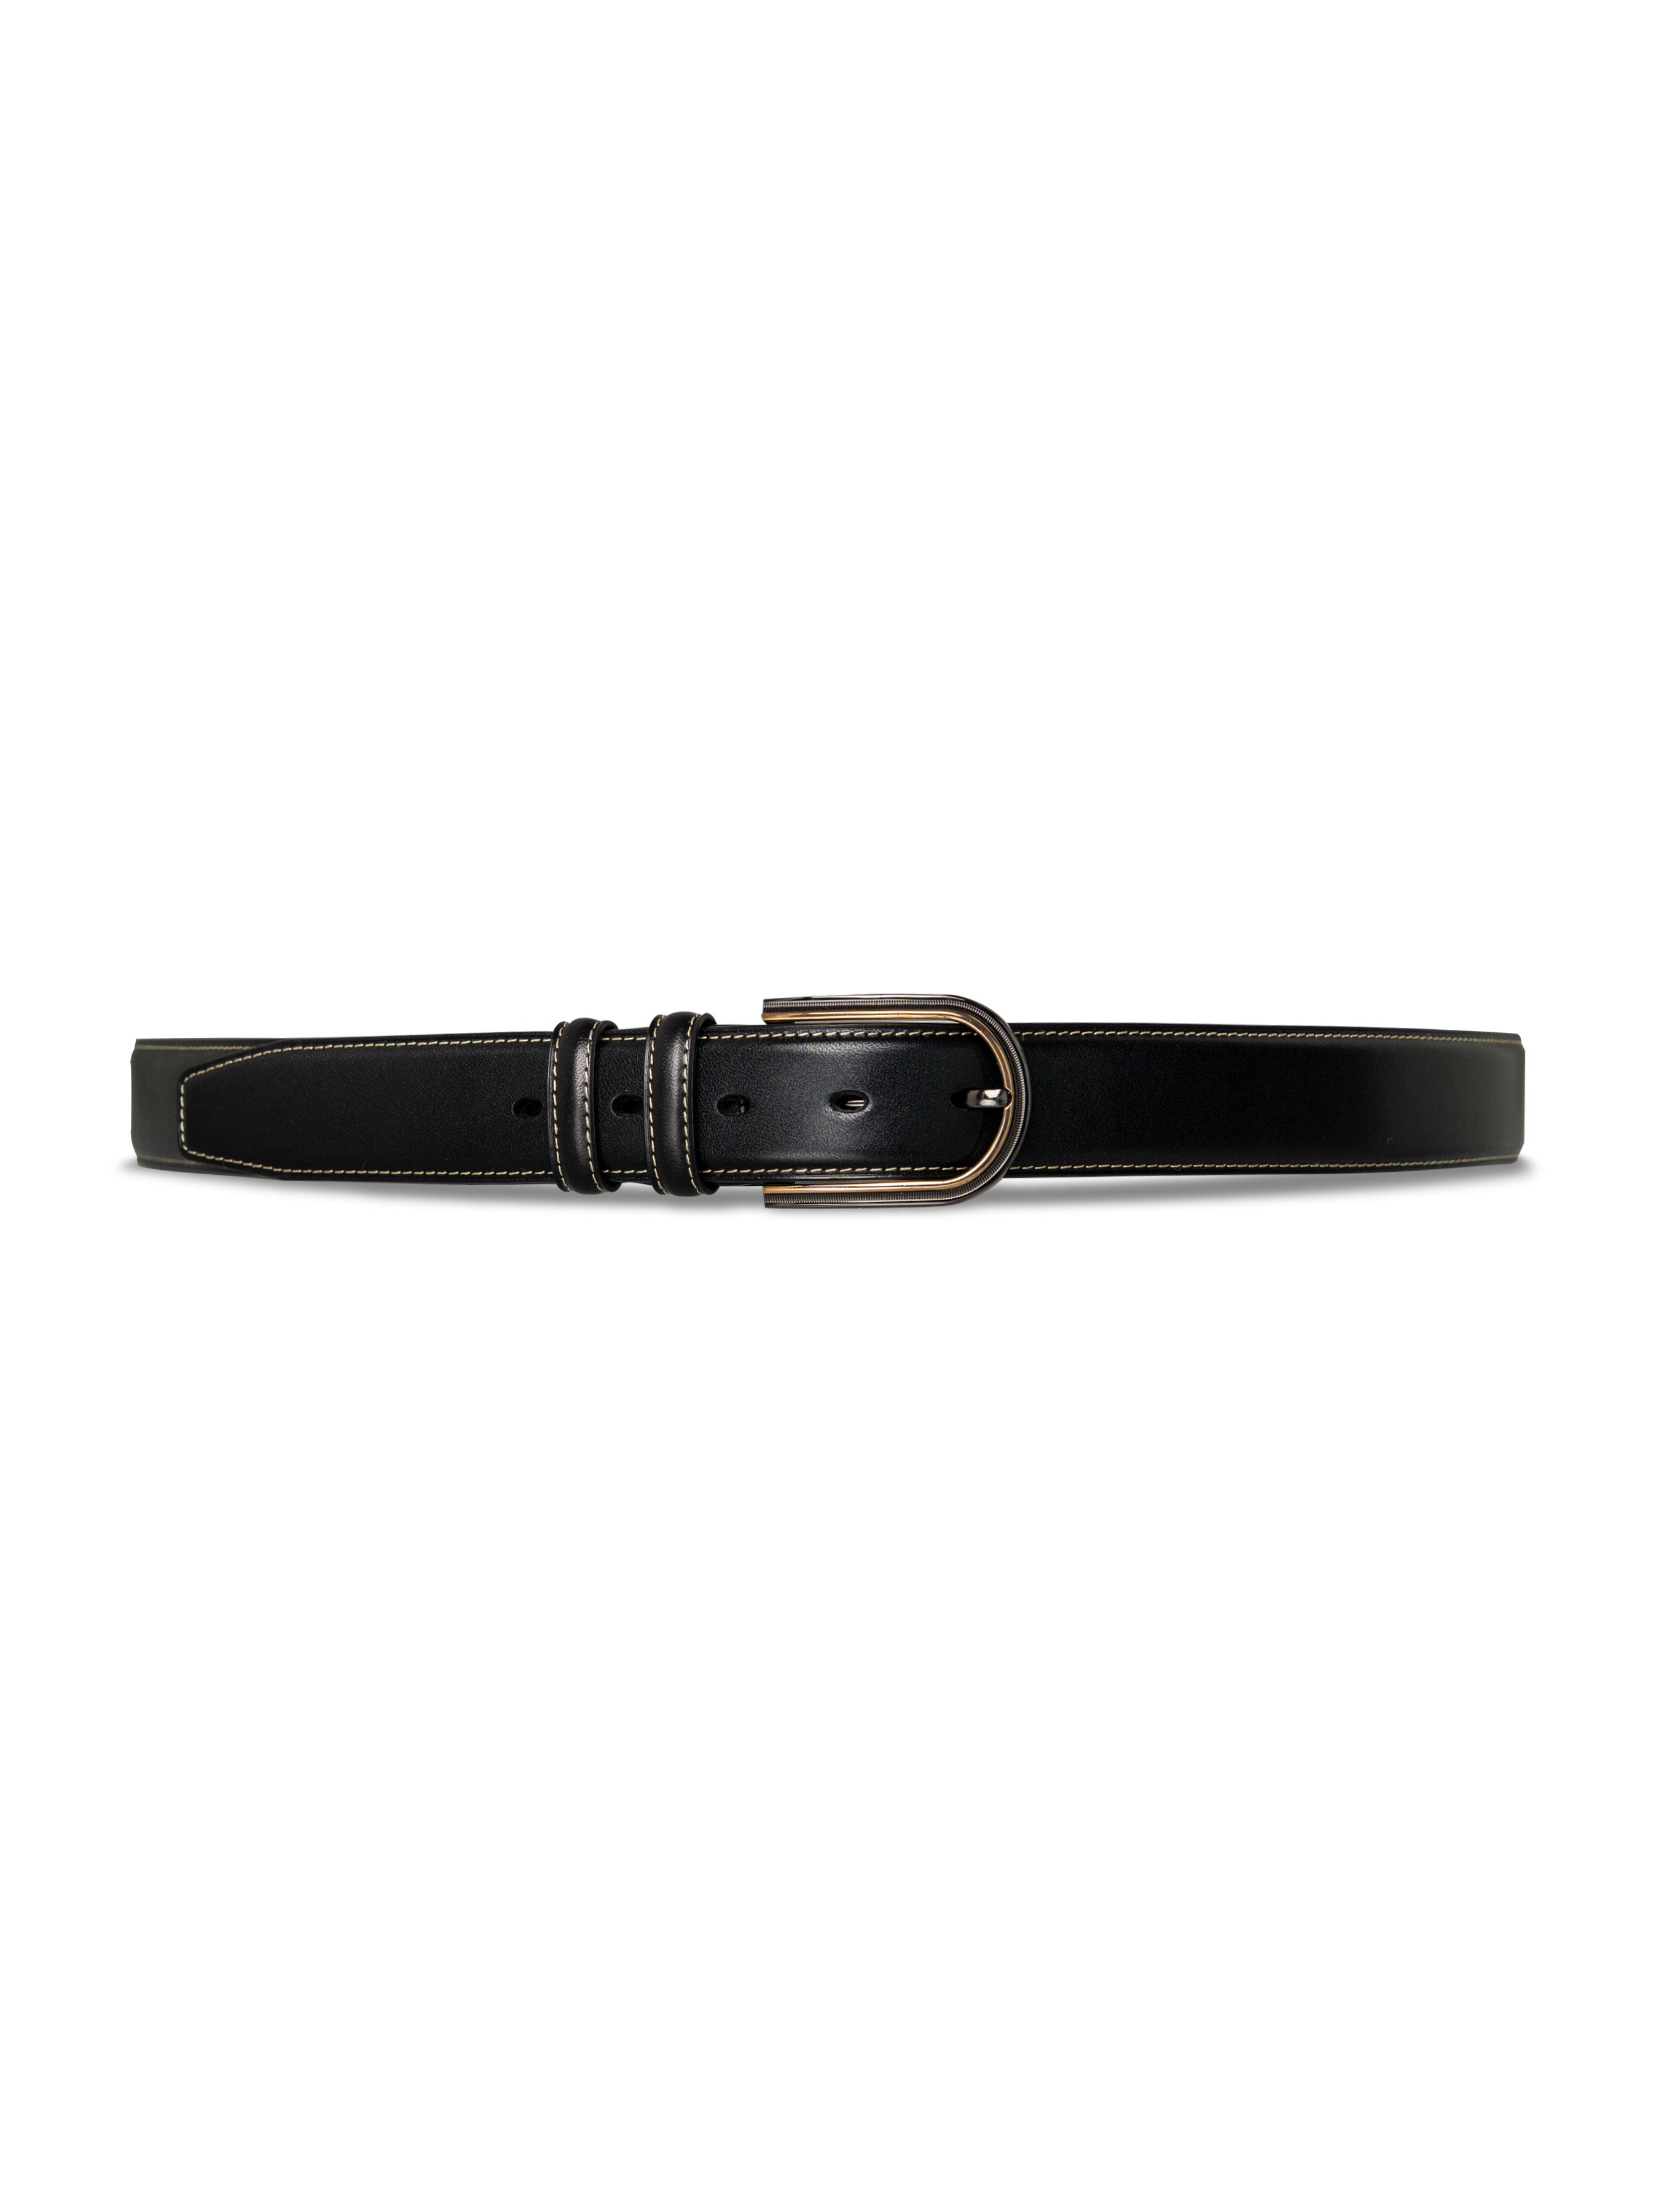 Leather Belt with Palladium-toned Buckle (Hand Painted Patina) - Zeve Shoes